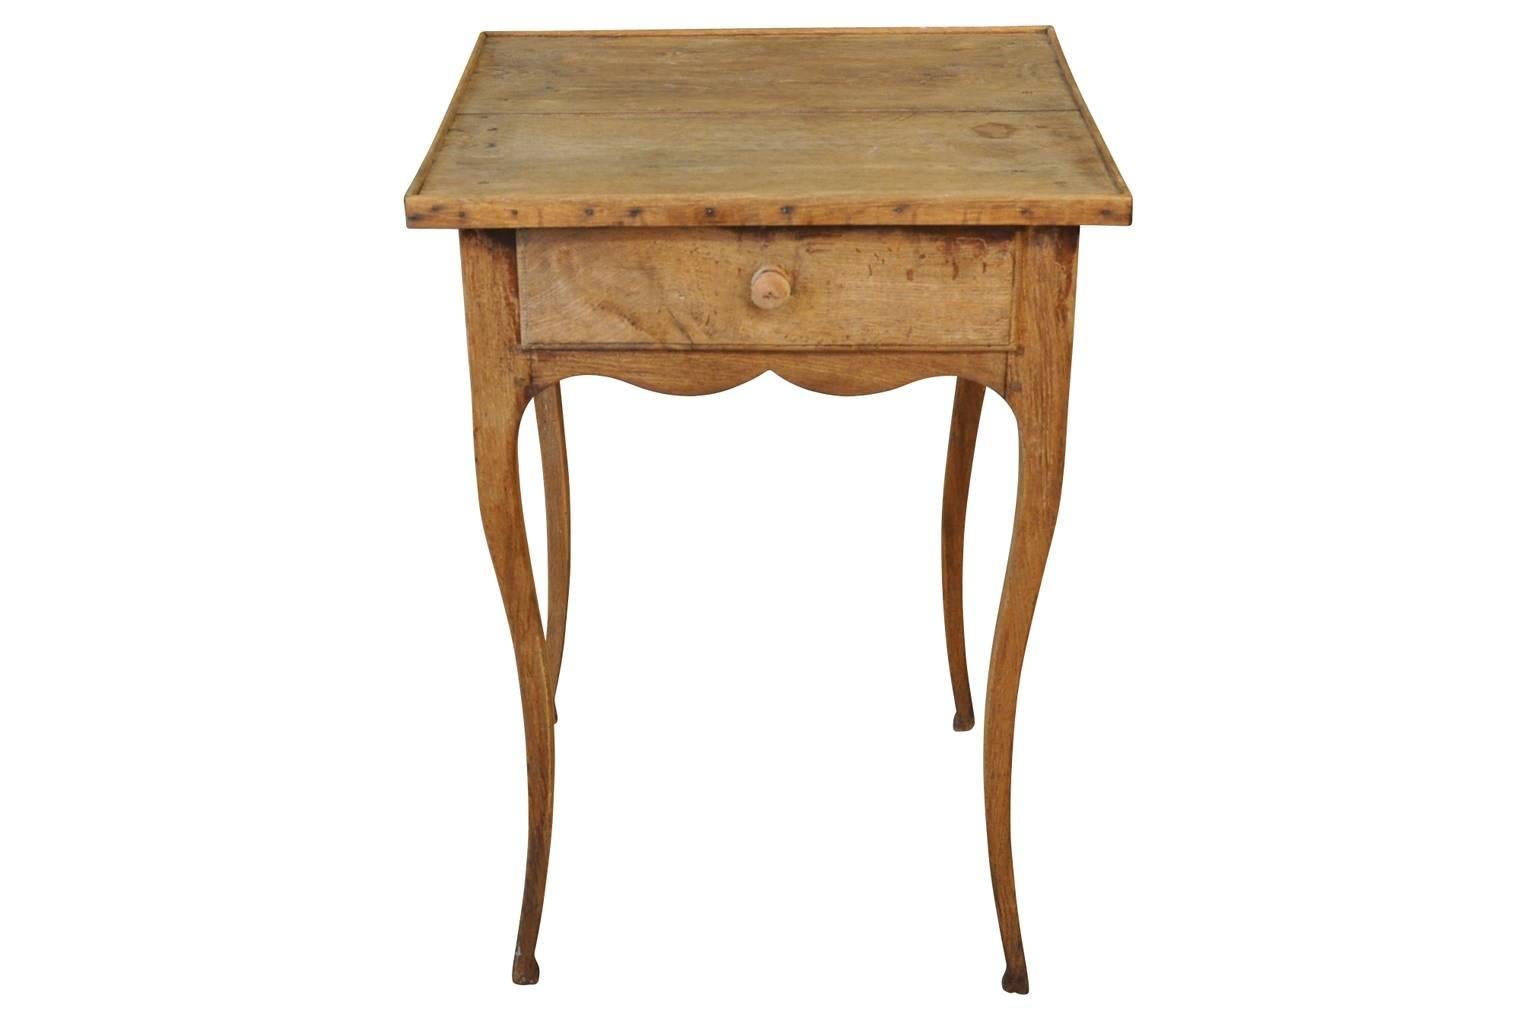 A very charming early 19th century Country French side table in washed or bleached oak.  Beautifully constructed with a single drawer, sculpted apron and gentle cabriole legs.  